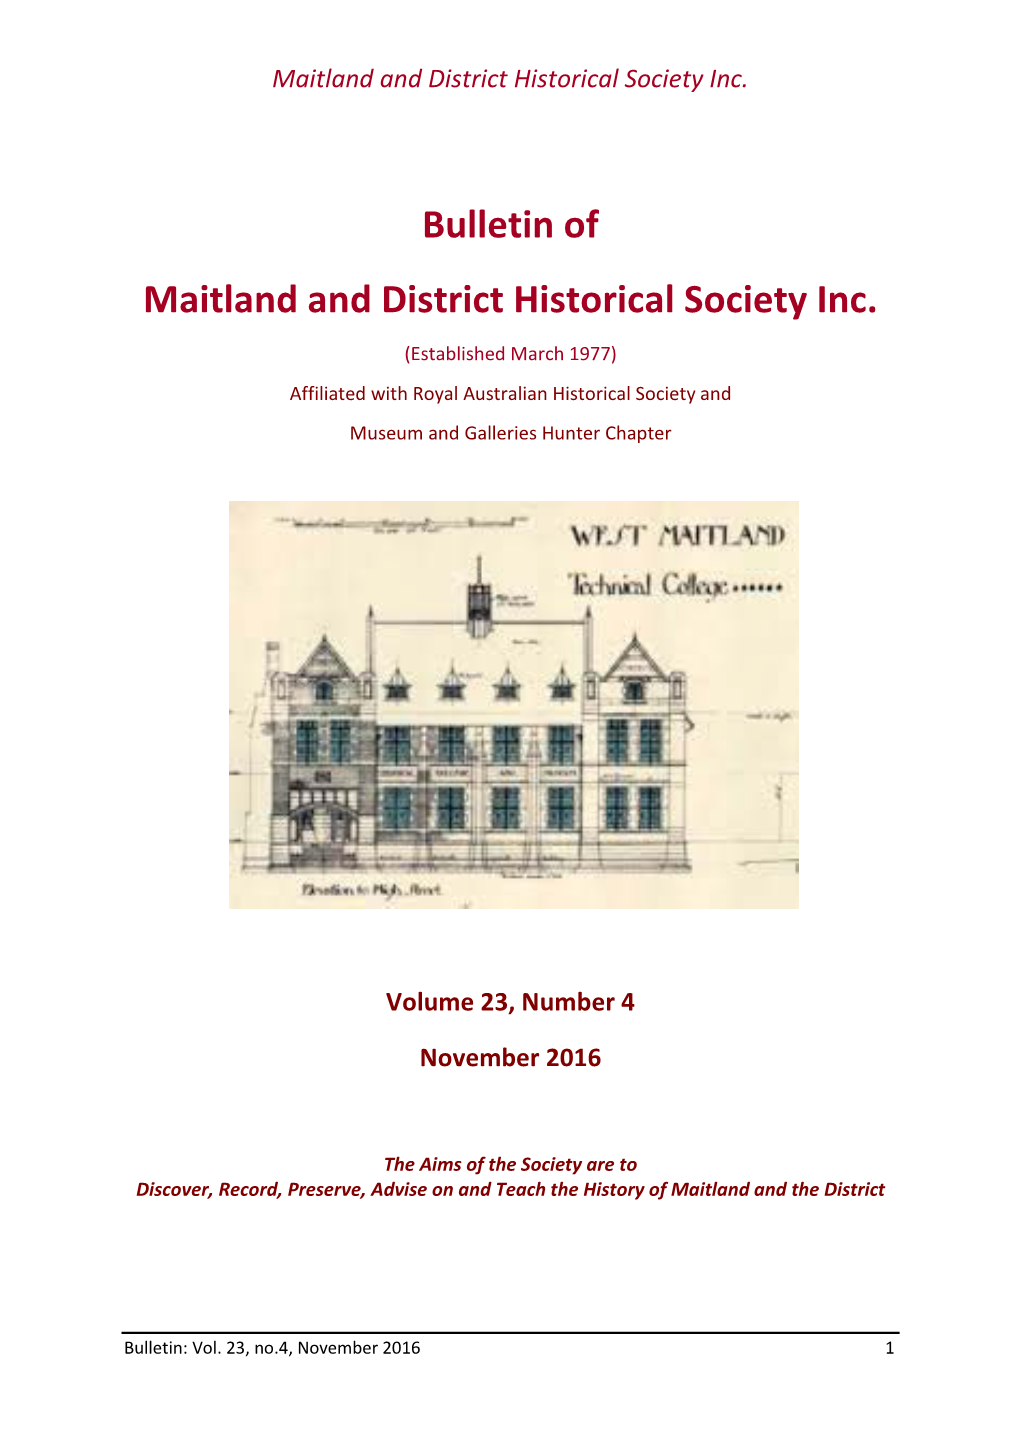 Bulletin of Maitland and District Historical Society Inc